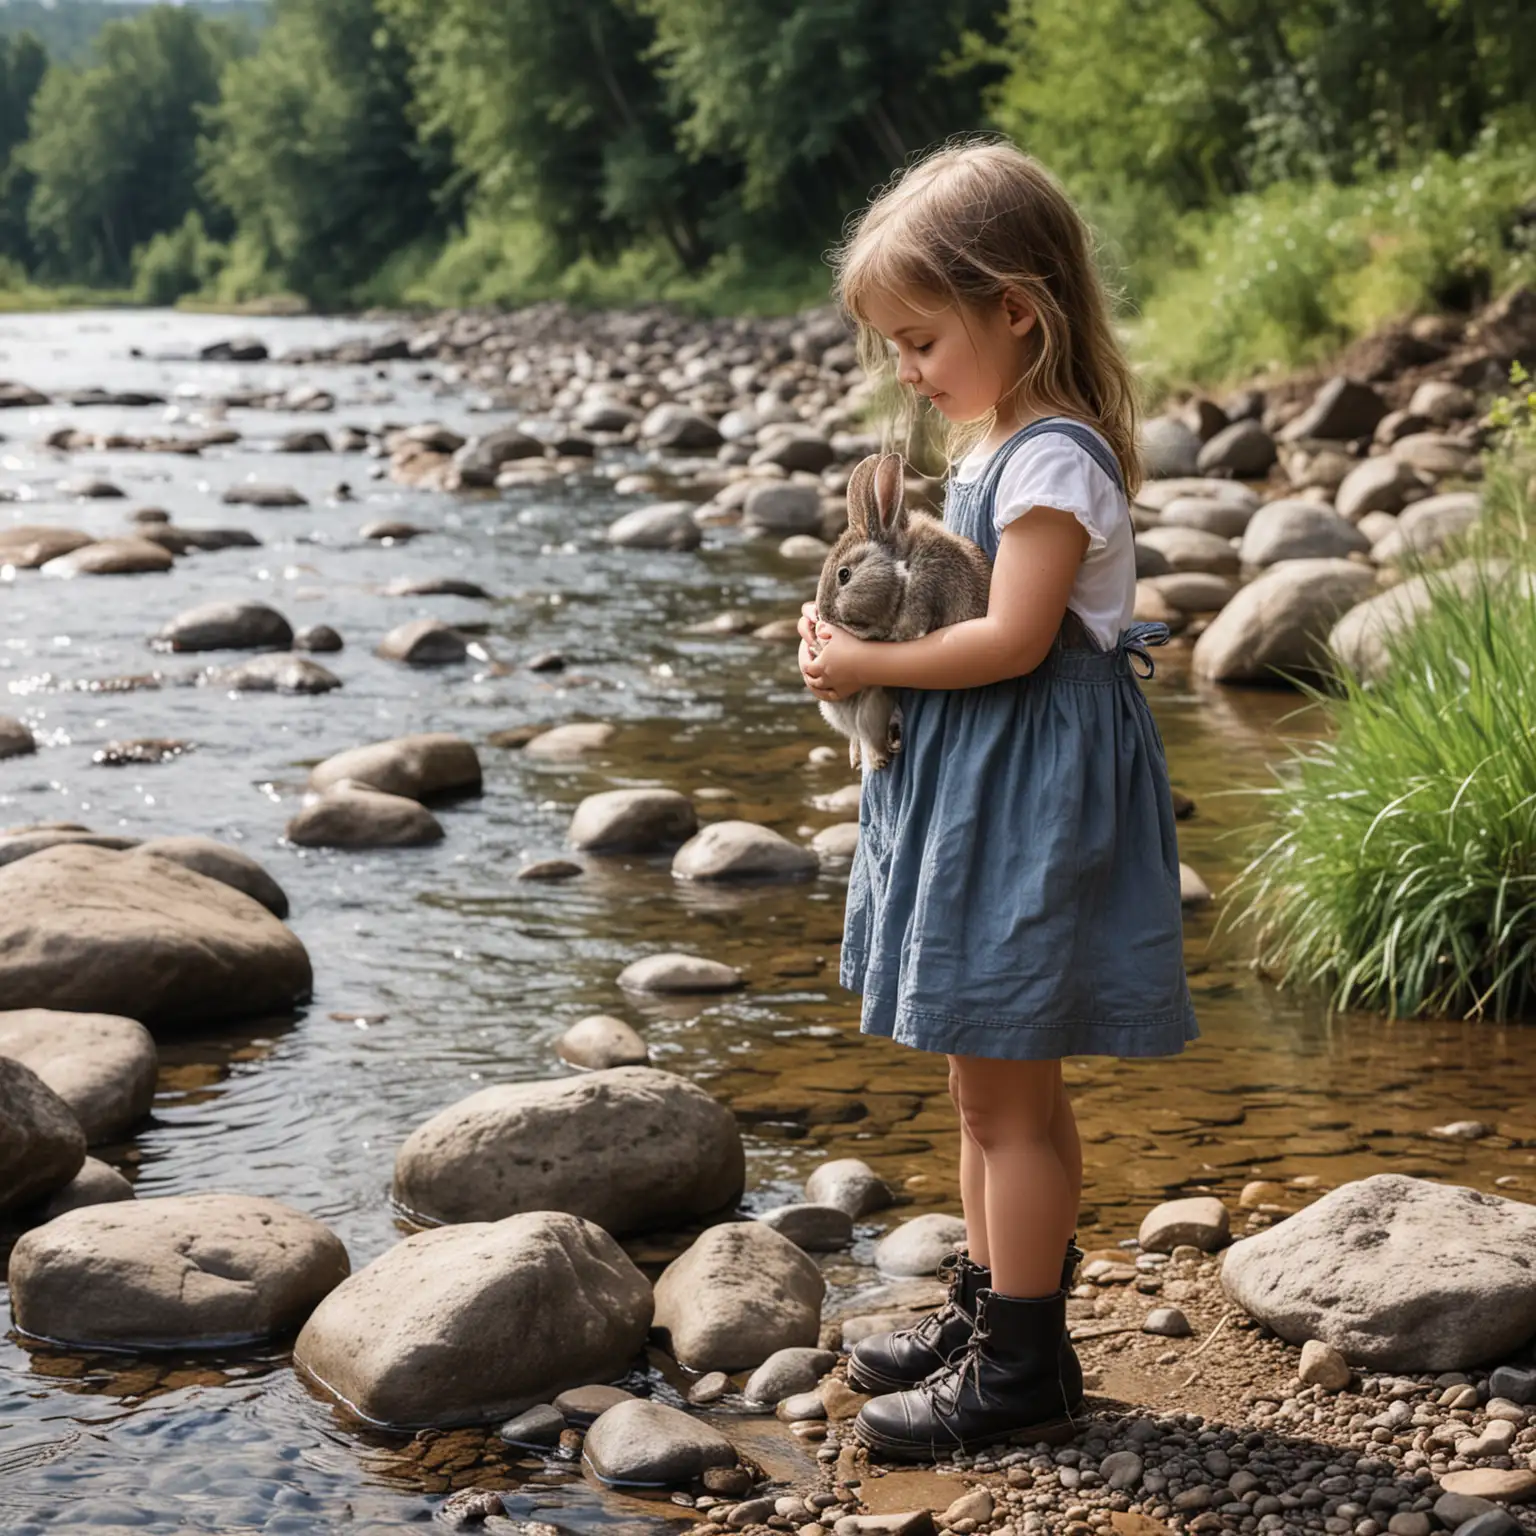 Little-Girl-Holding-Rabbit-by-Shallow-River-with-Big-Rocks